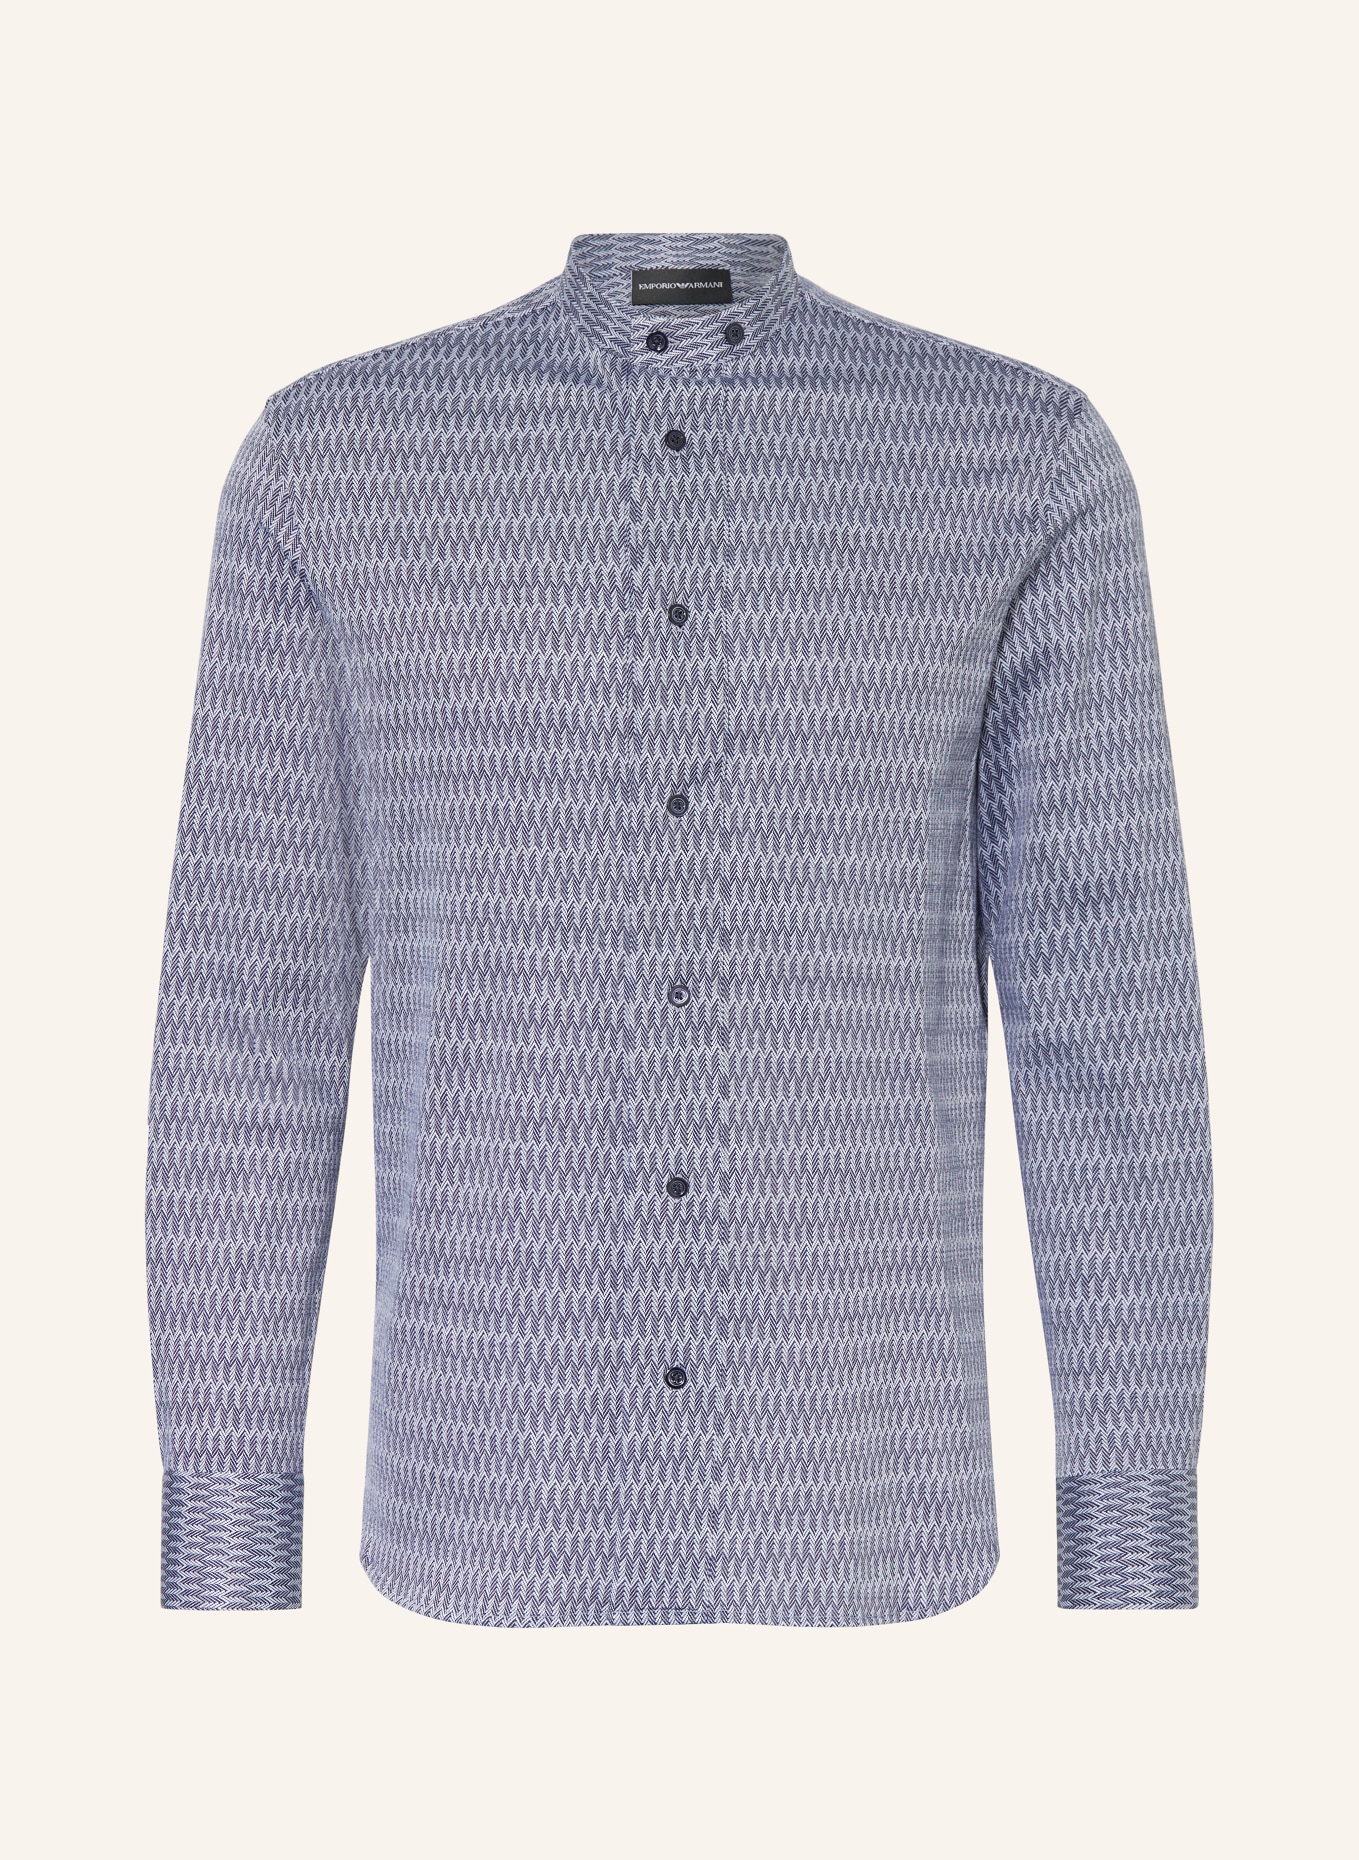 EMPORIO ARMANI Shirt regular fit with stand-up collar, Color: DARK BLUE/ WHITE (Image 1)